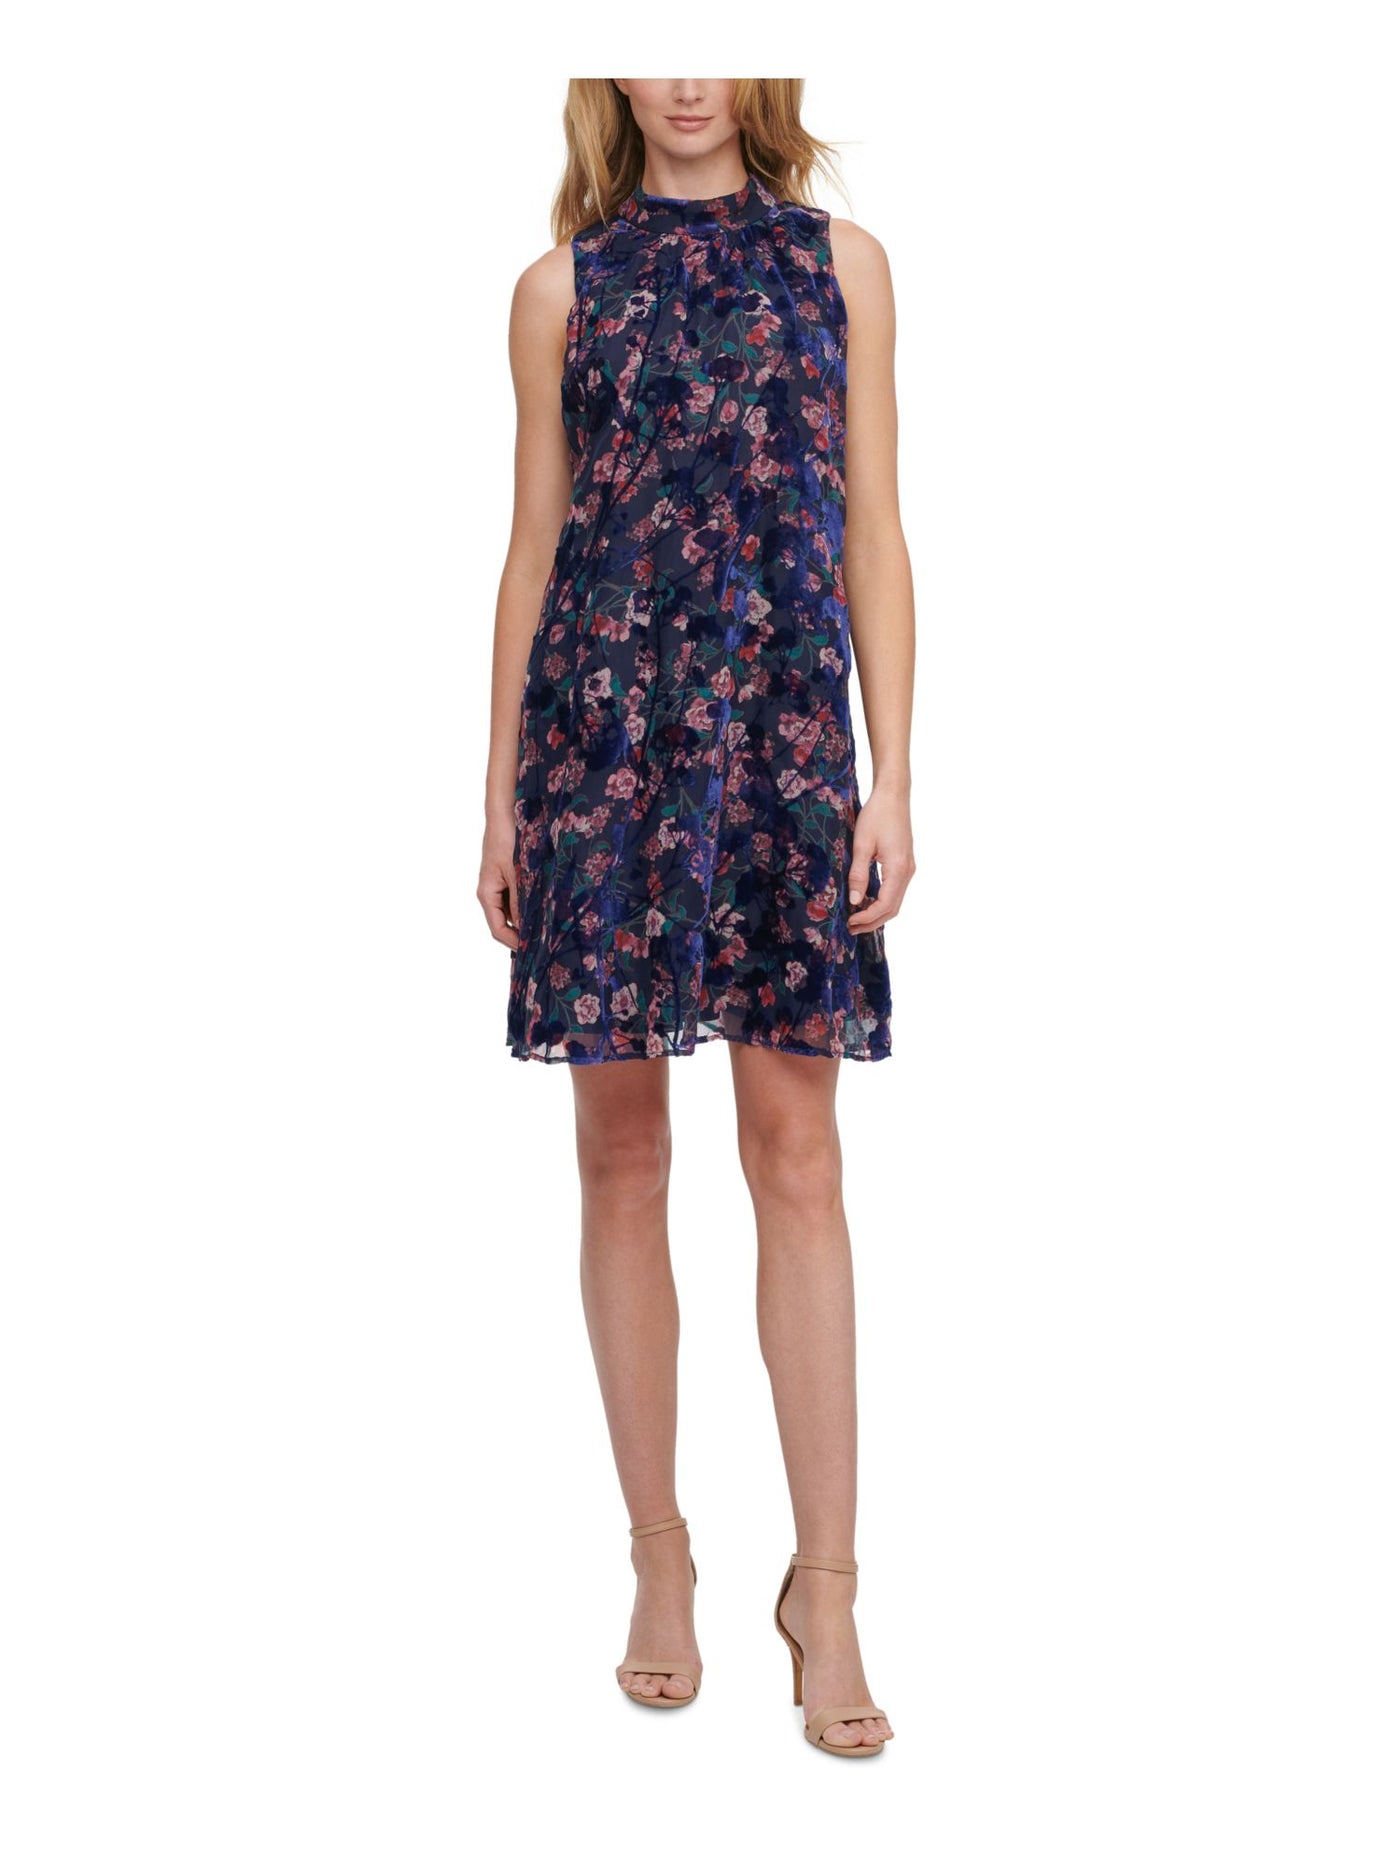 TOMMY HILFIGER Womens Navy Textured Mock-neck Burnout Floral Sleeveless Above The Knee A-Line Dress 14